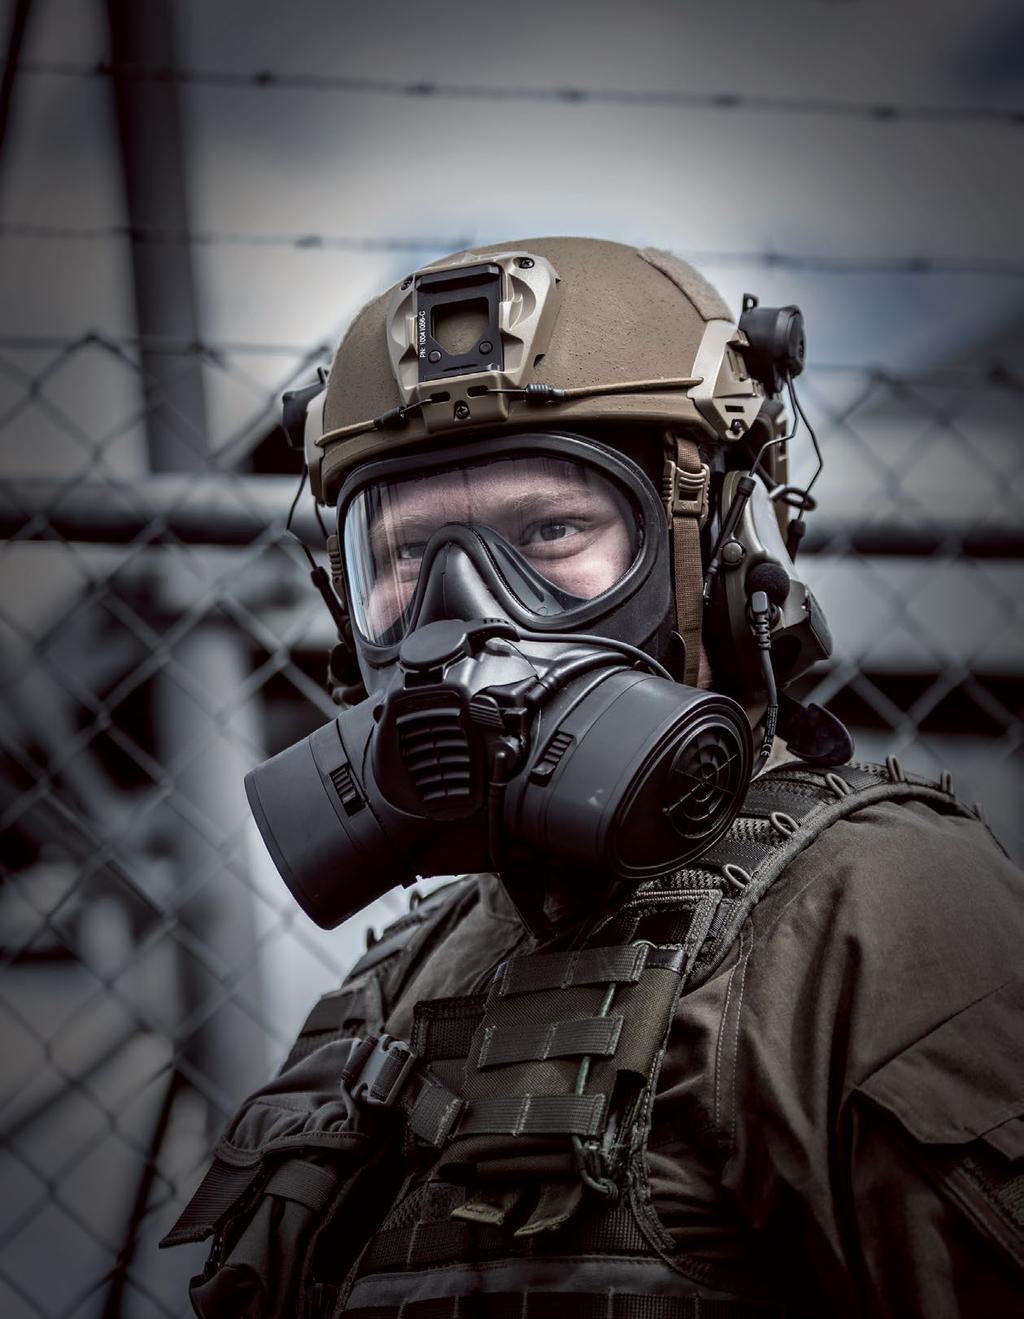 TM Military Integrated Safety Solutions Efficient Integration with other mission critical equipment e.g. helmets.